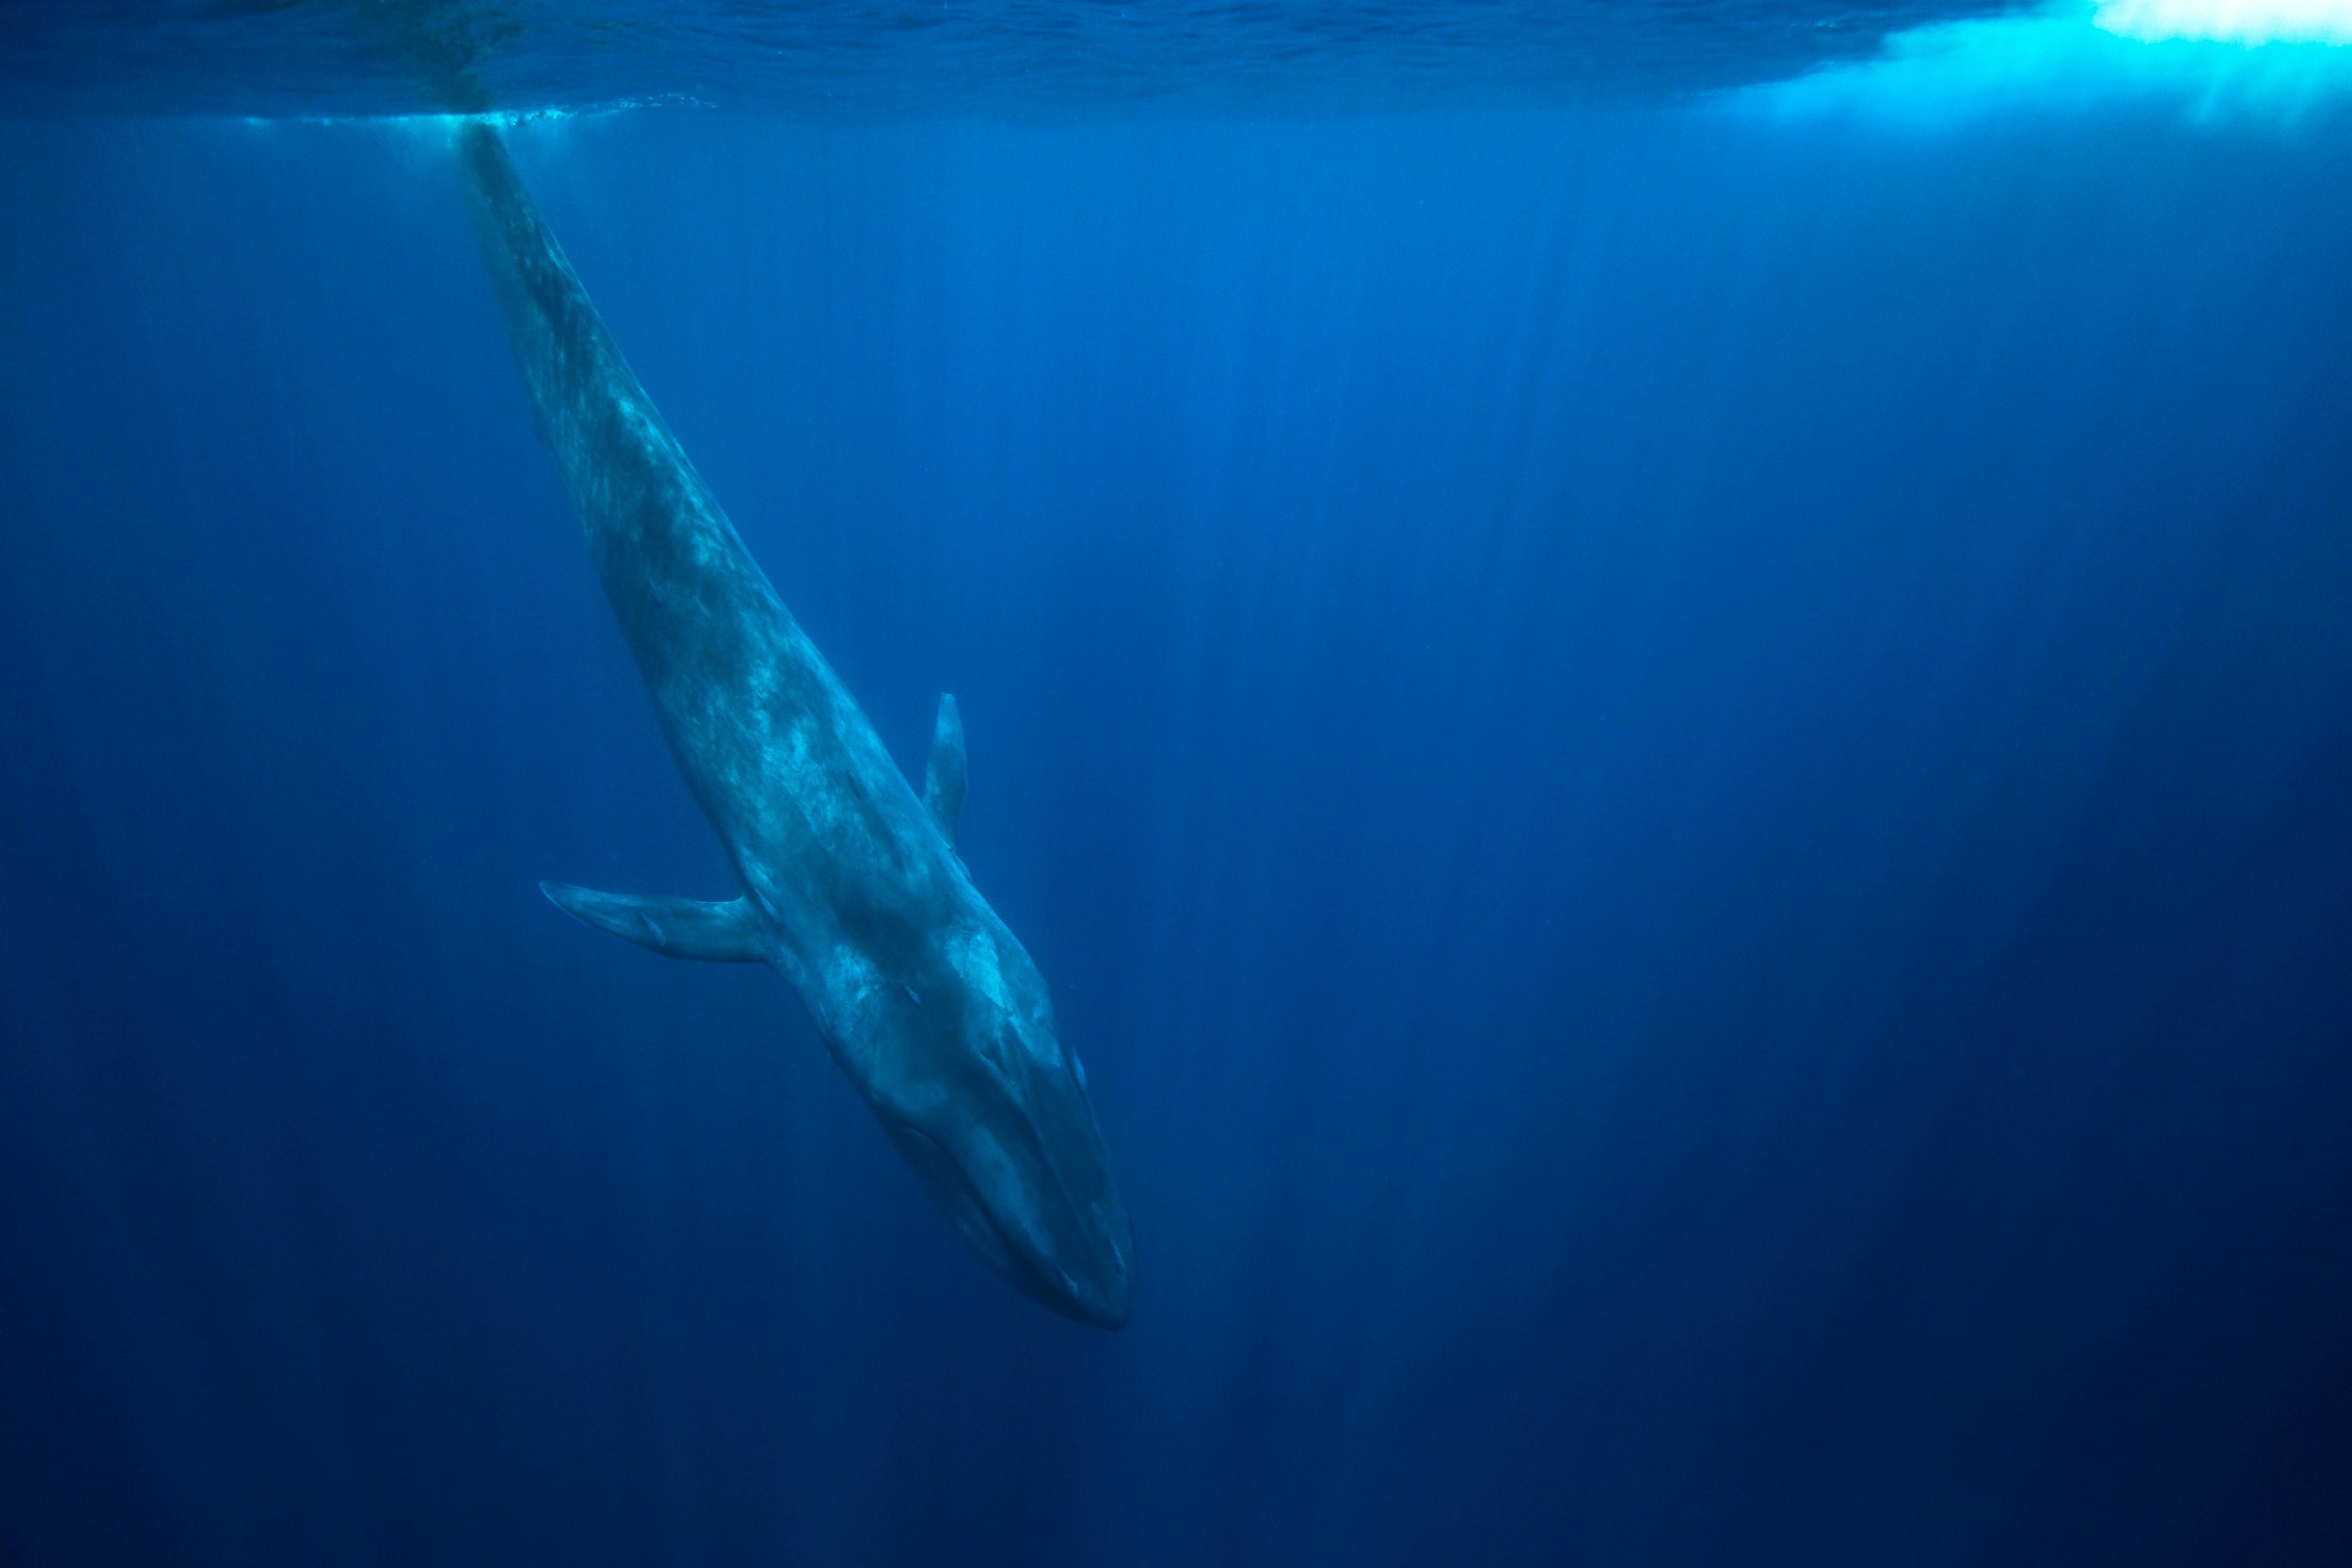 When the whale descends, its heart rate plummets too